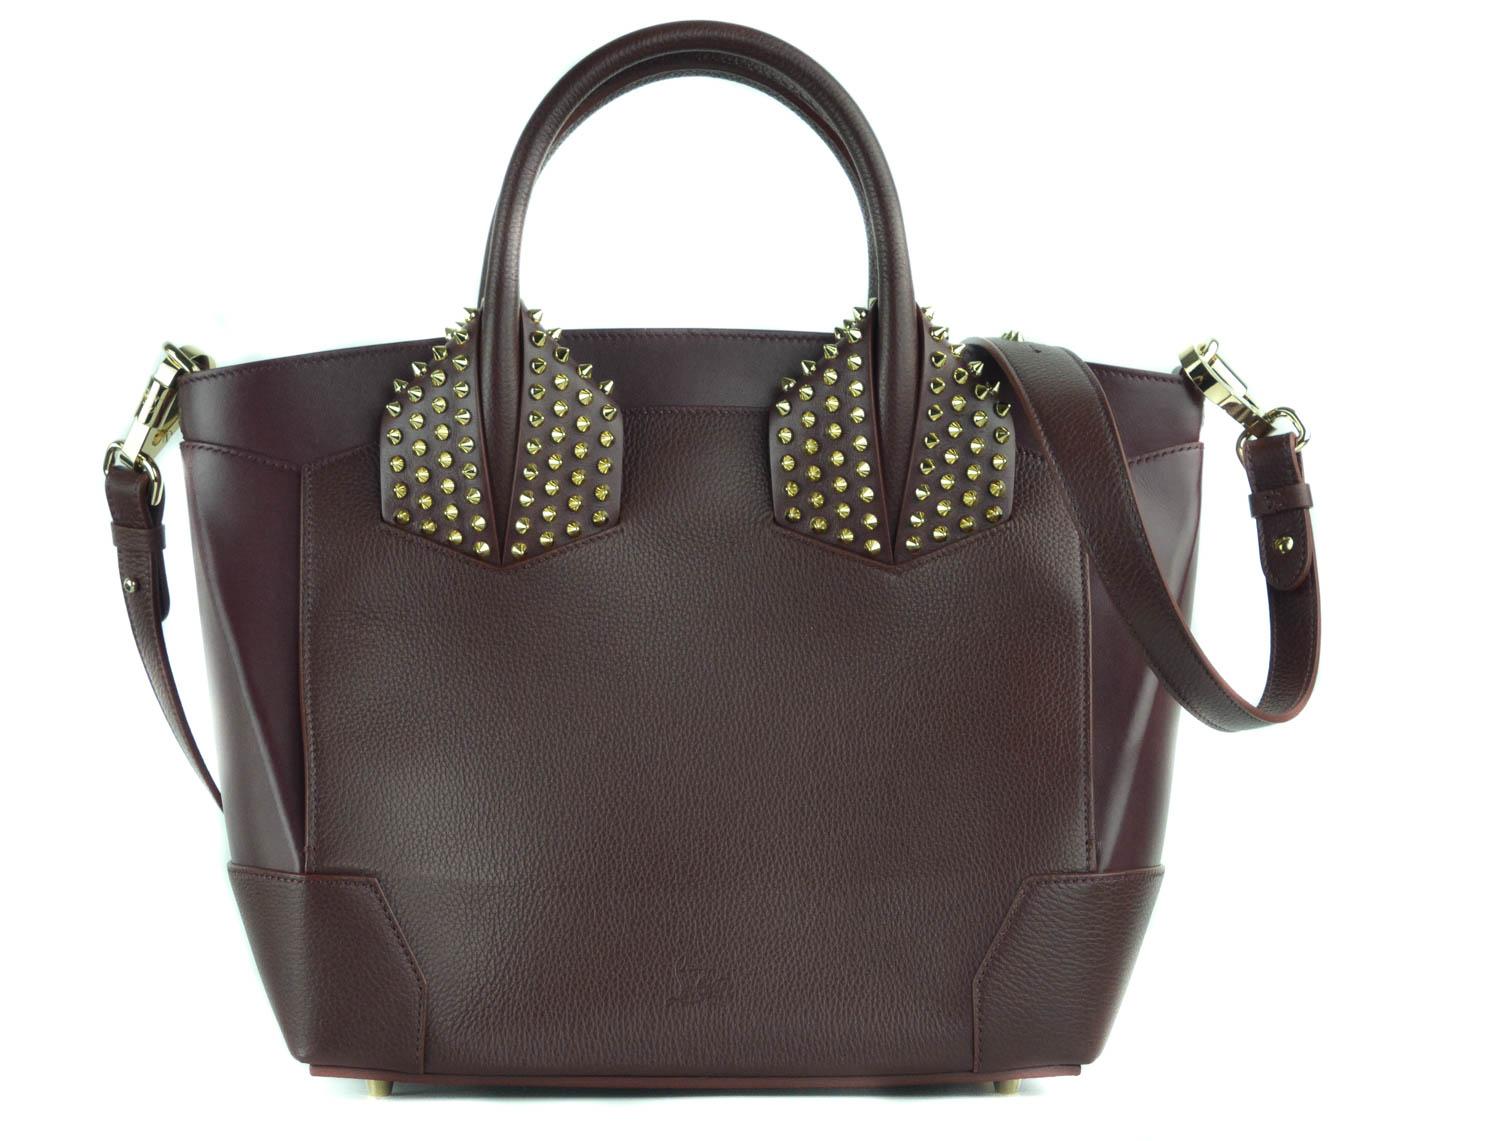 Christian Louboutin Burgundy Calfskin Large Eloise Bag In New Condition For Sale In Brooklyn, NY